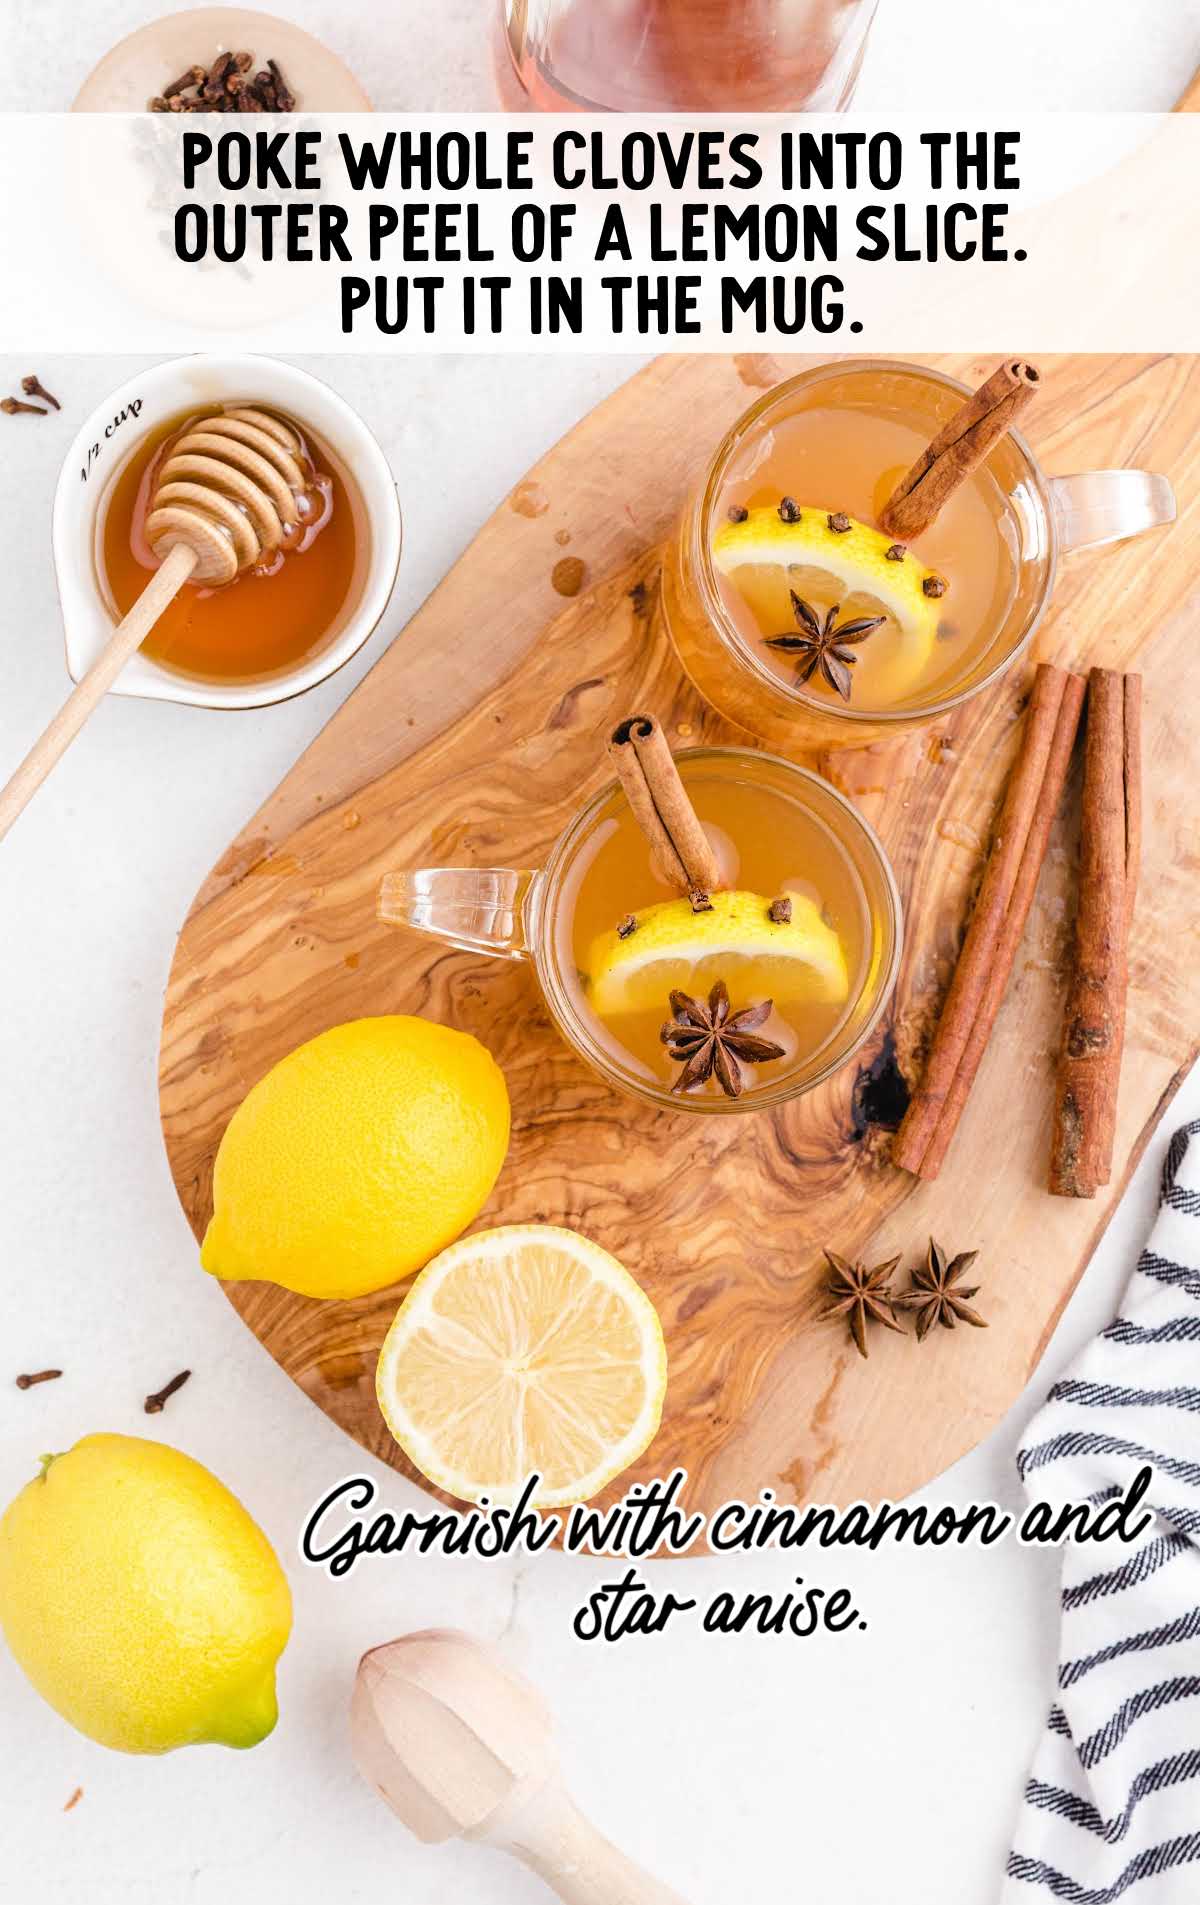 glass mugs of Hot Toddy garnished with cinnamon, star anise, and lemon